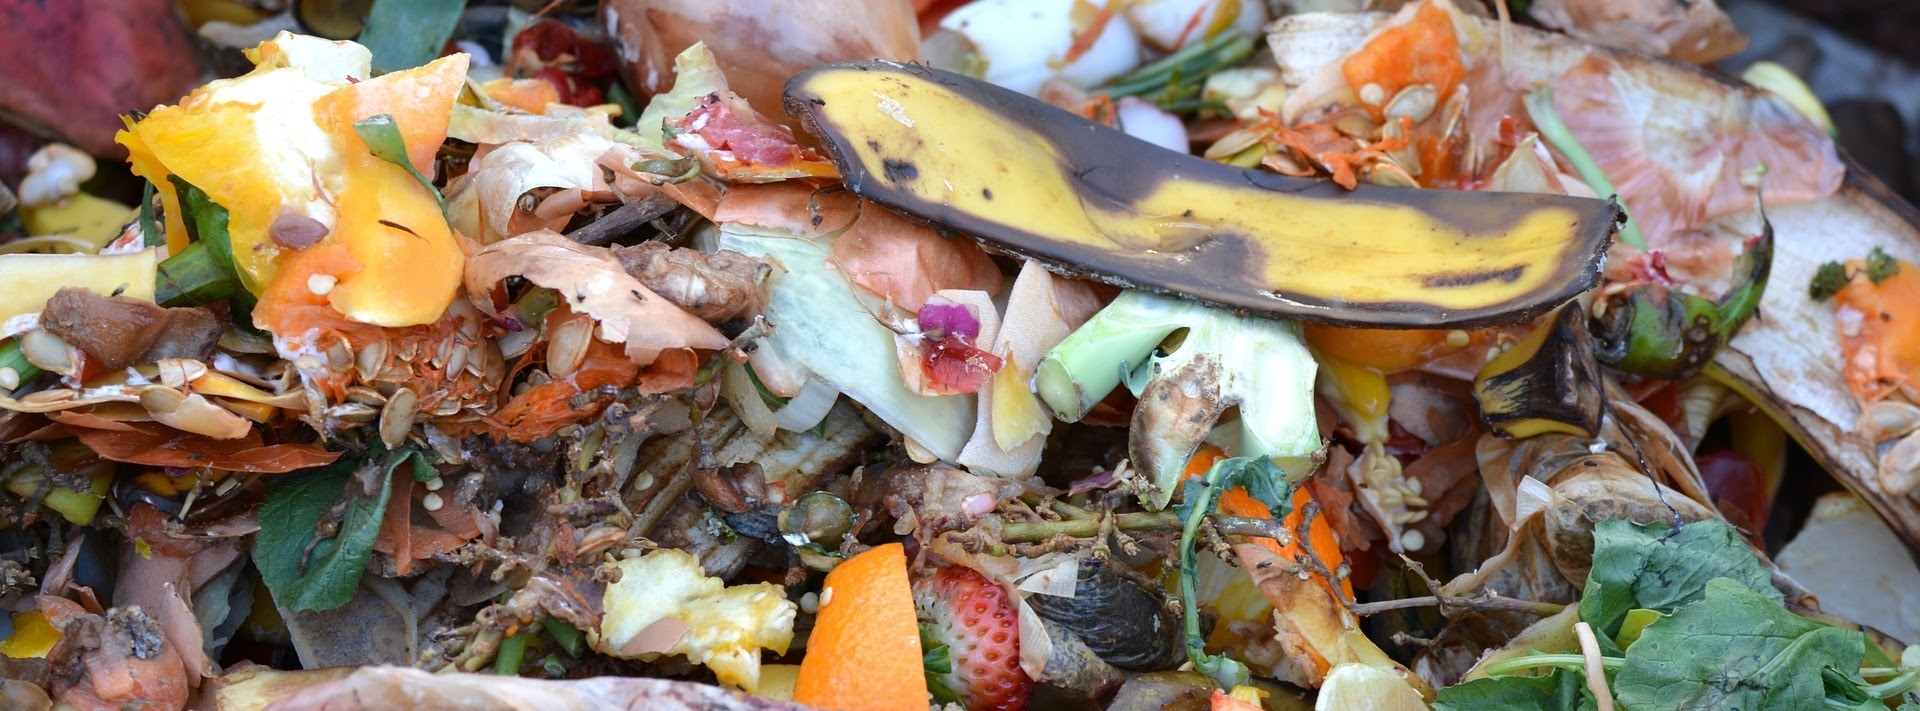 How to Make Your Own Compost